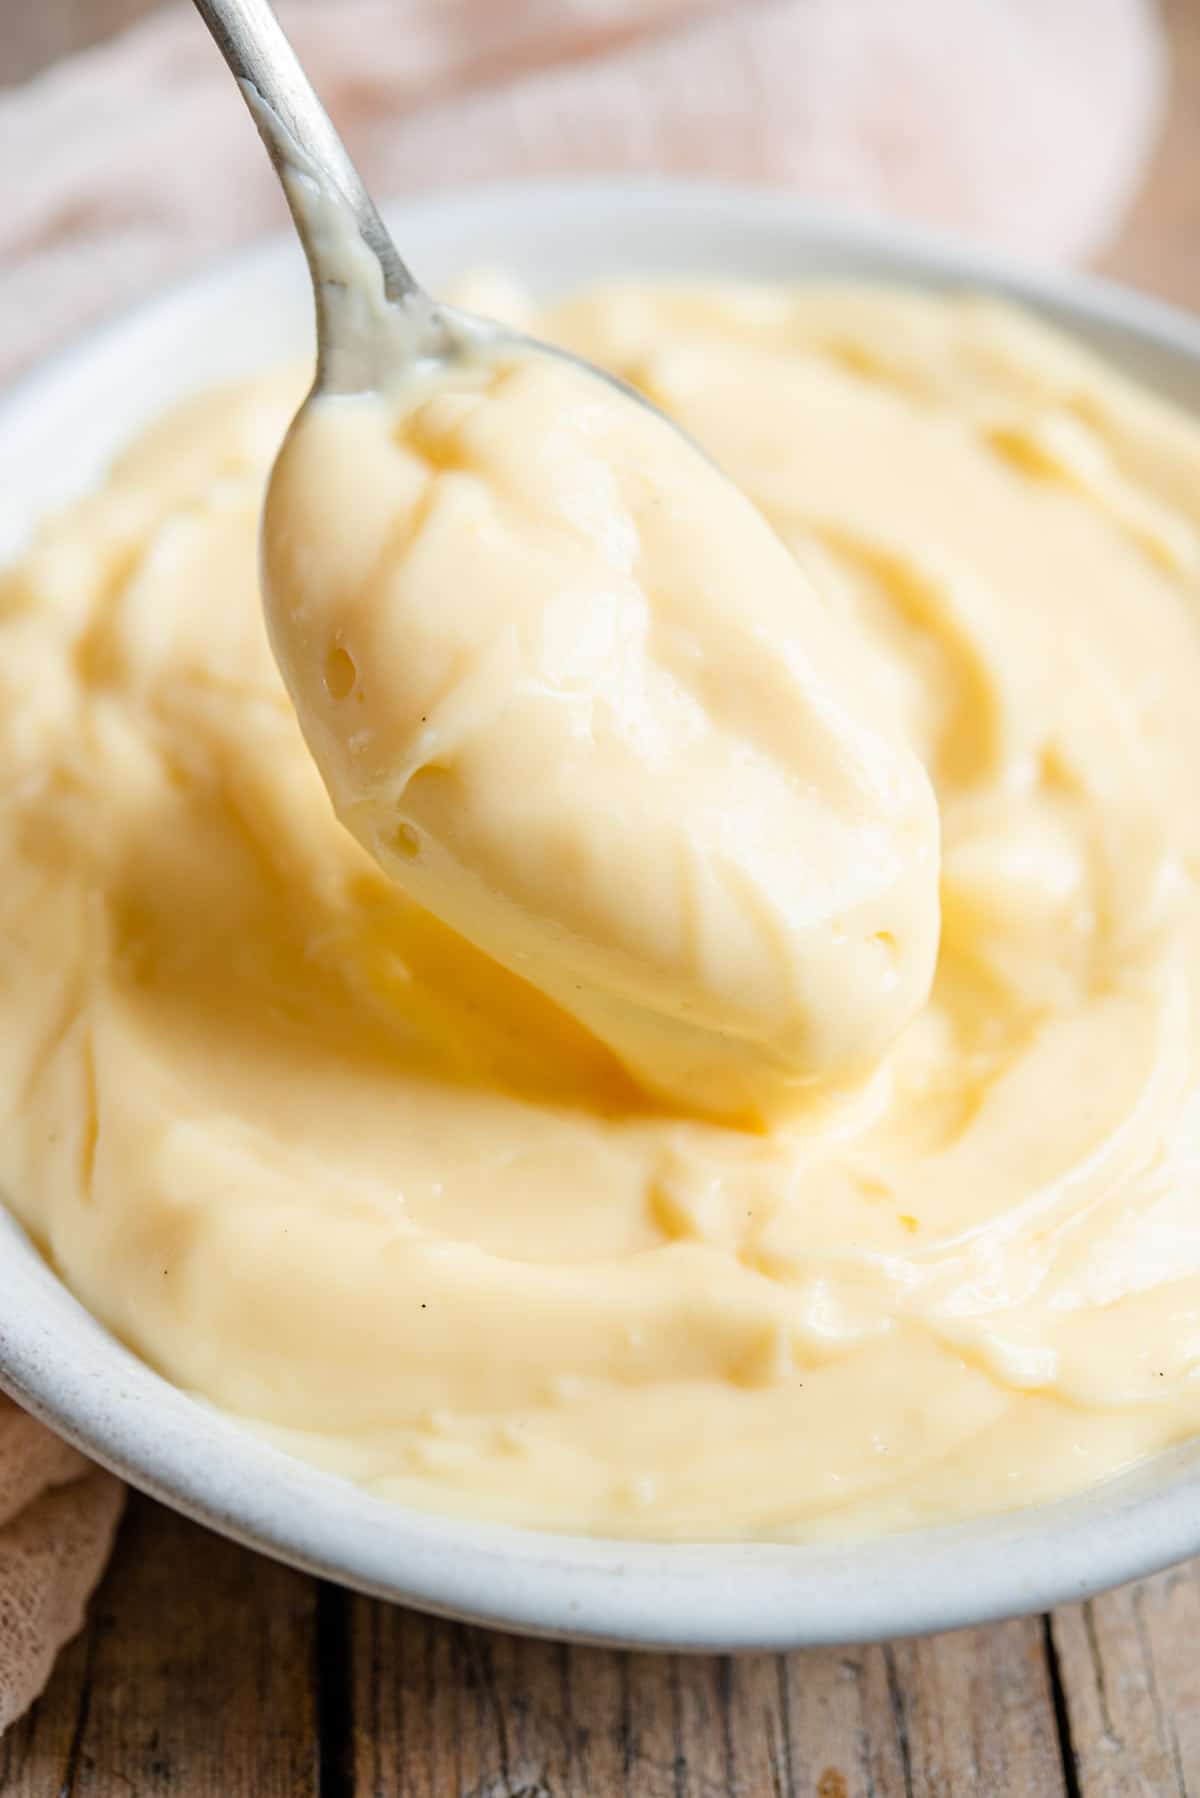 A close up of a spoonful of Italian pastry cream